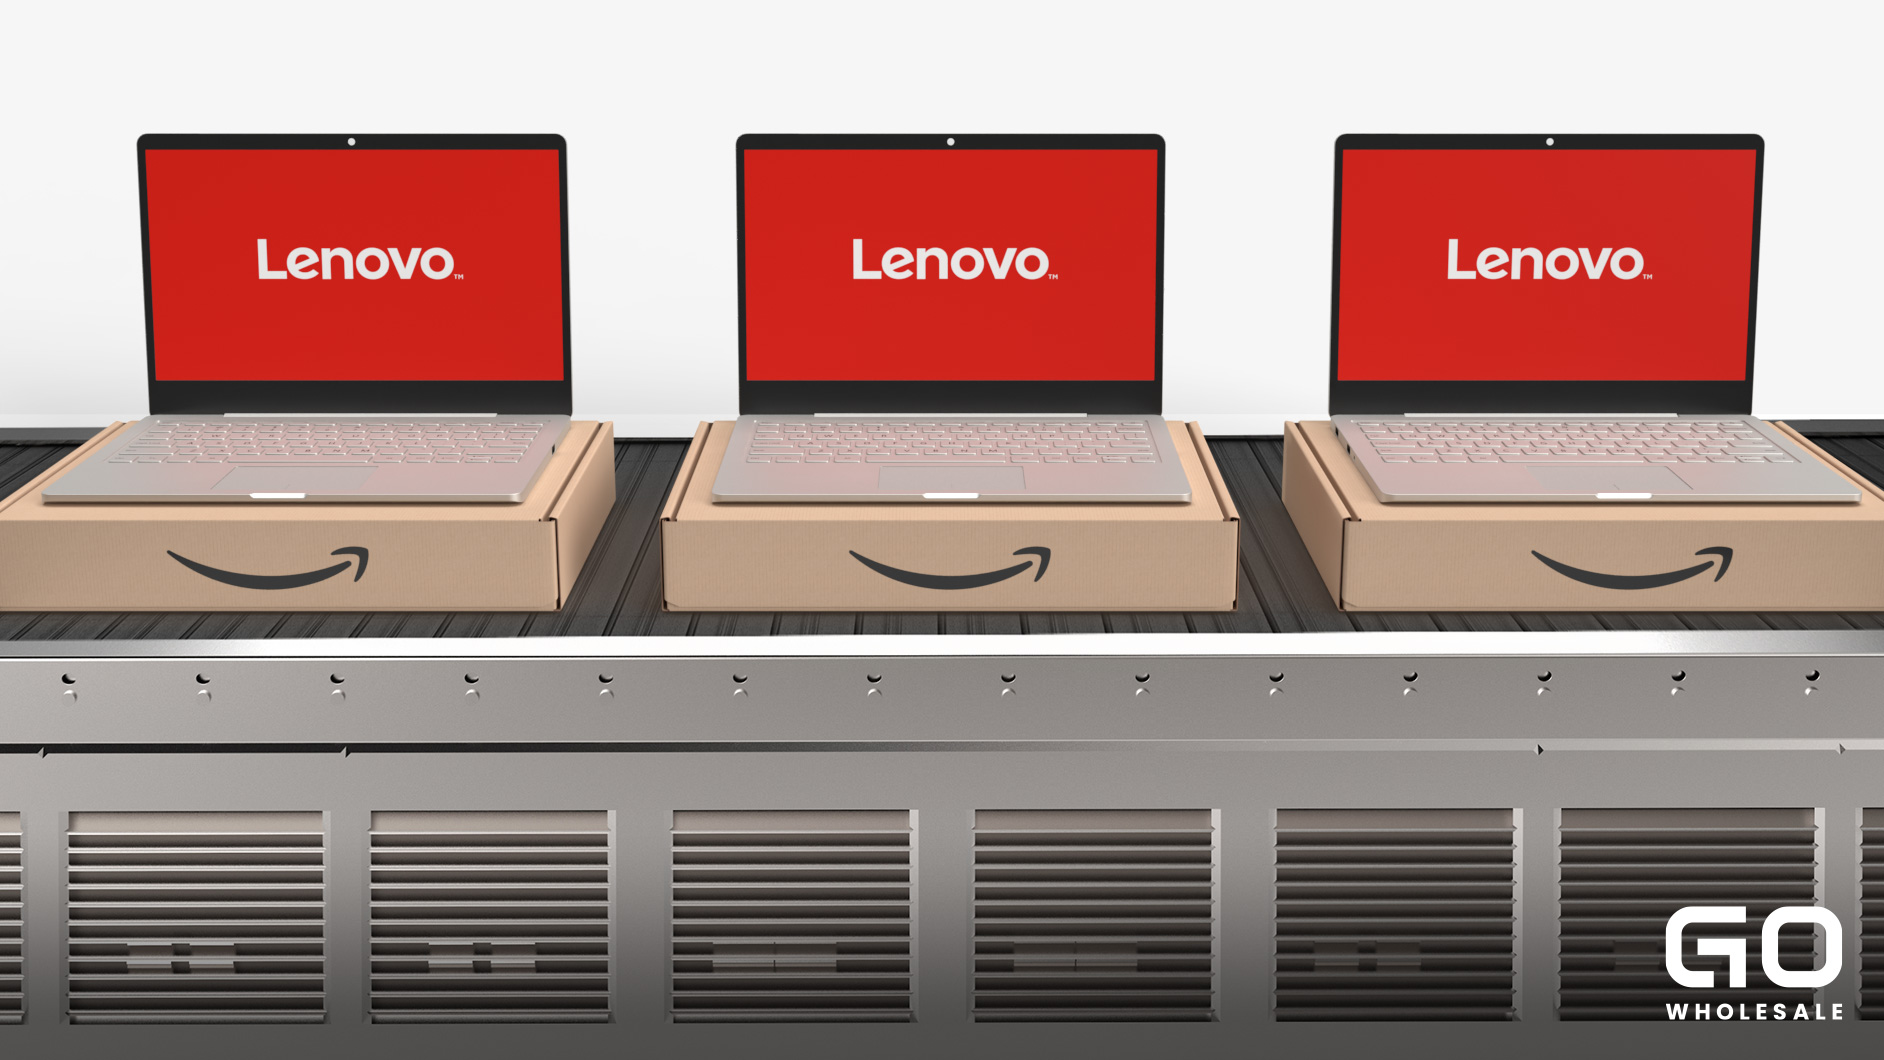 Selling Lenovo Laptops on Amazon FBA: Which Models Should You Stock from Wholesale Suppliers